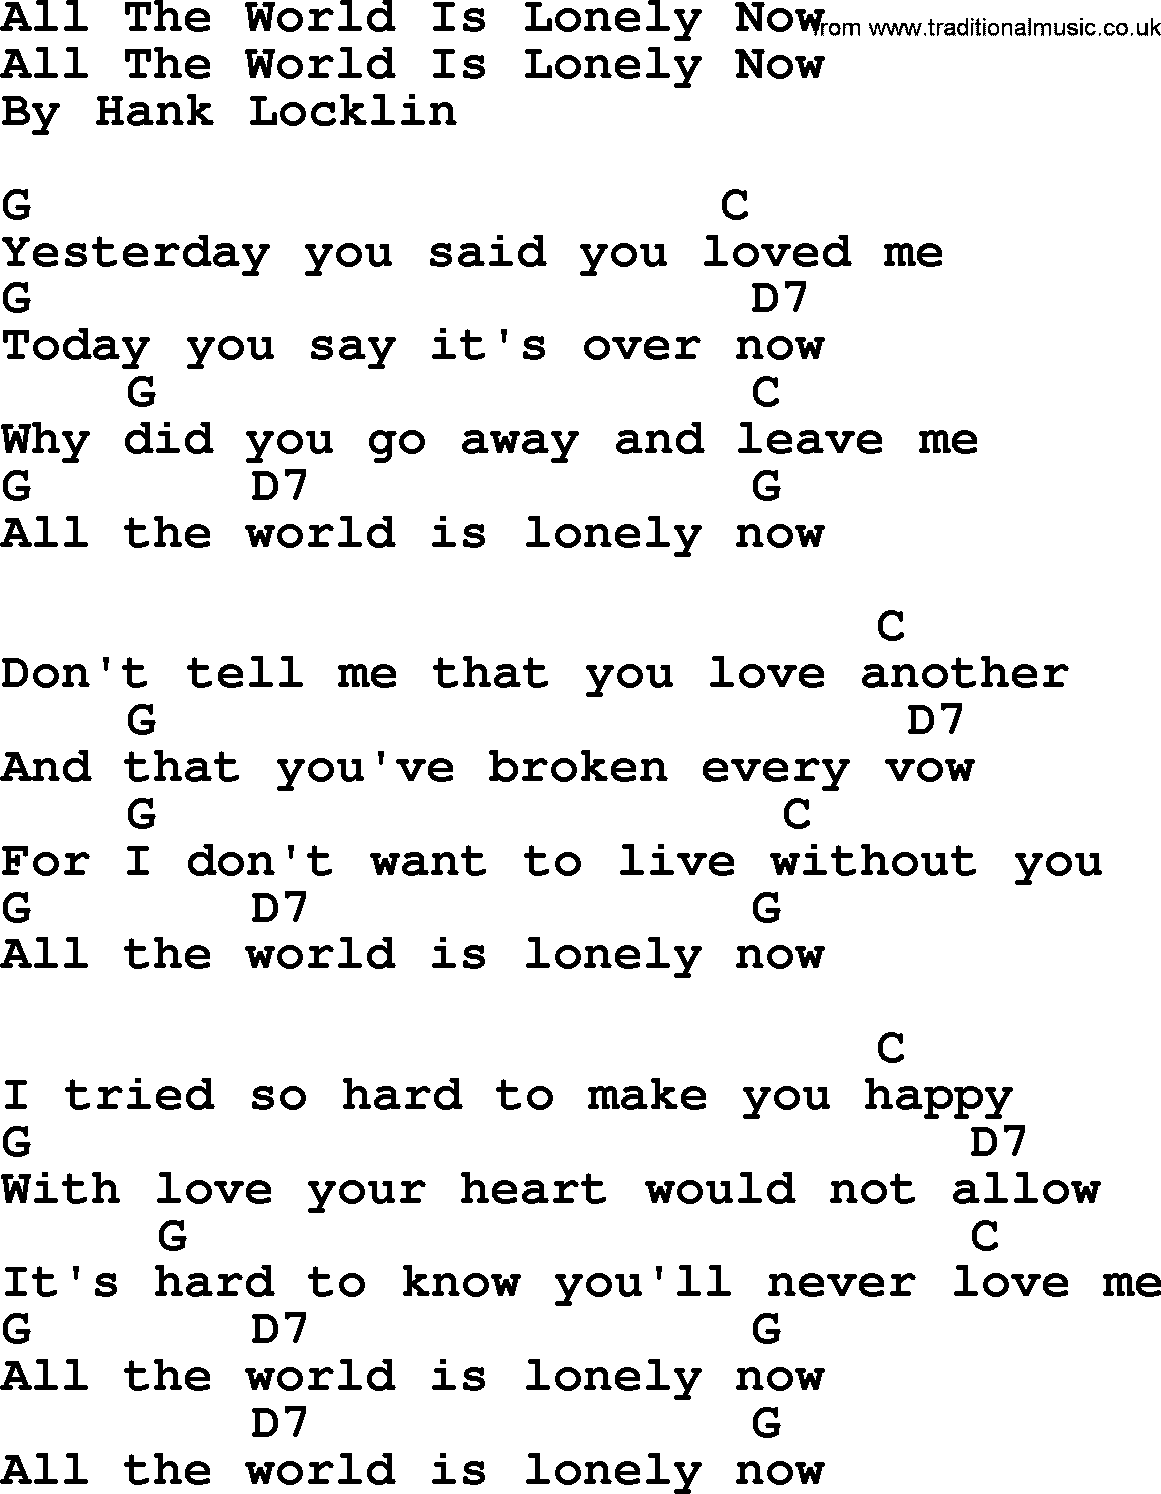 Bluegrass song: All The World Is Lonely Now, lyrics and chords